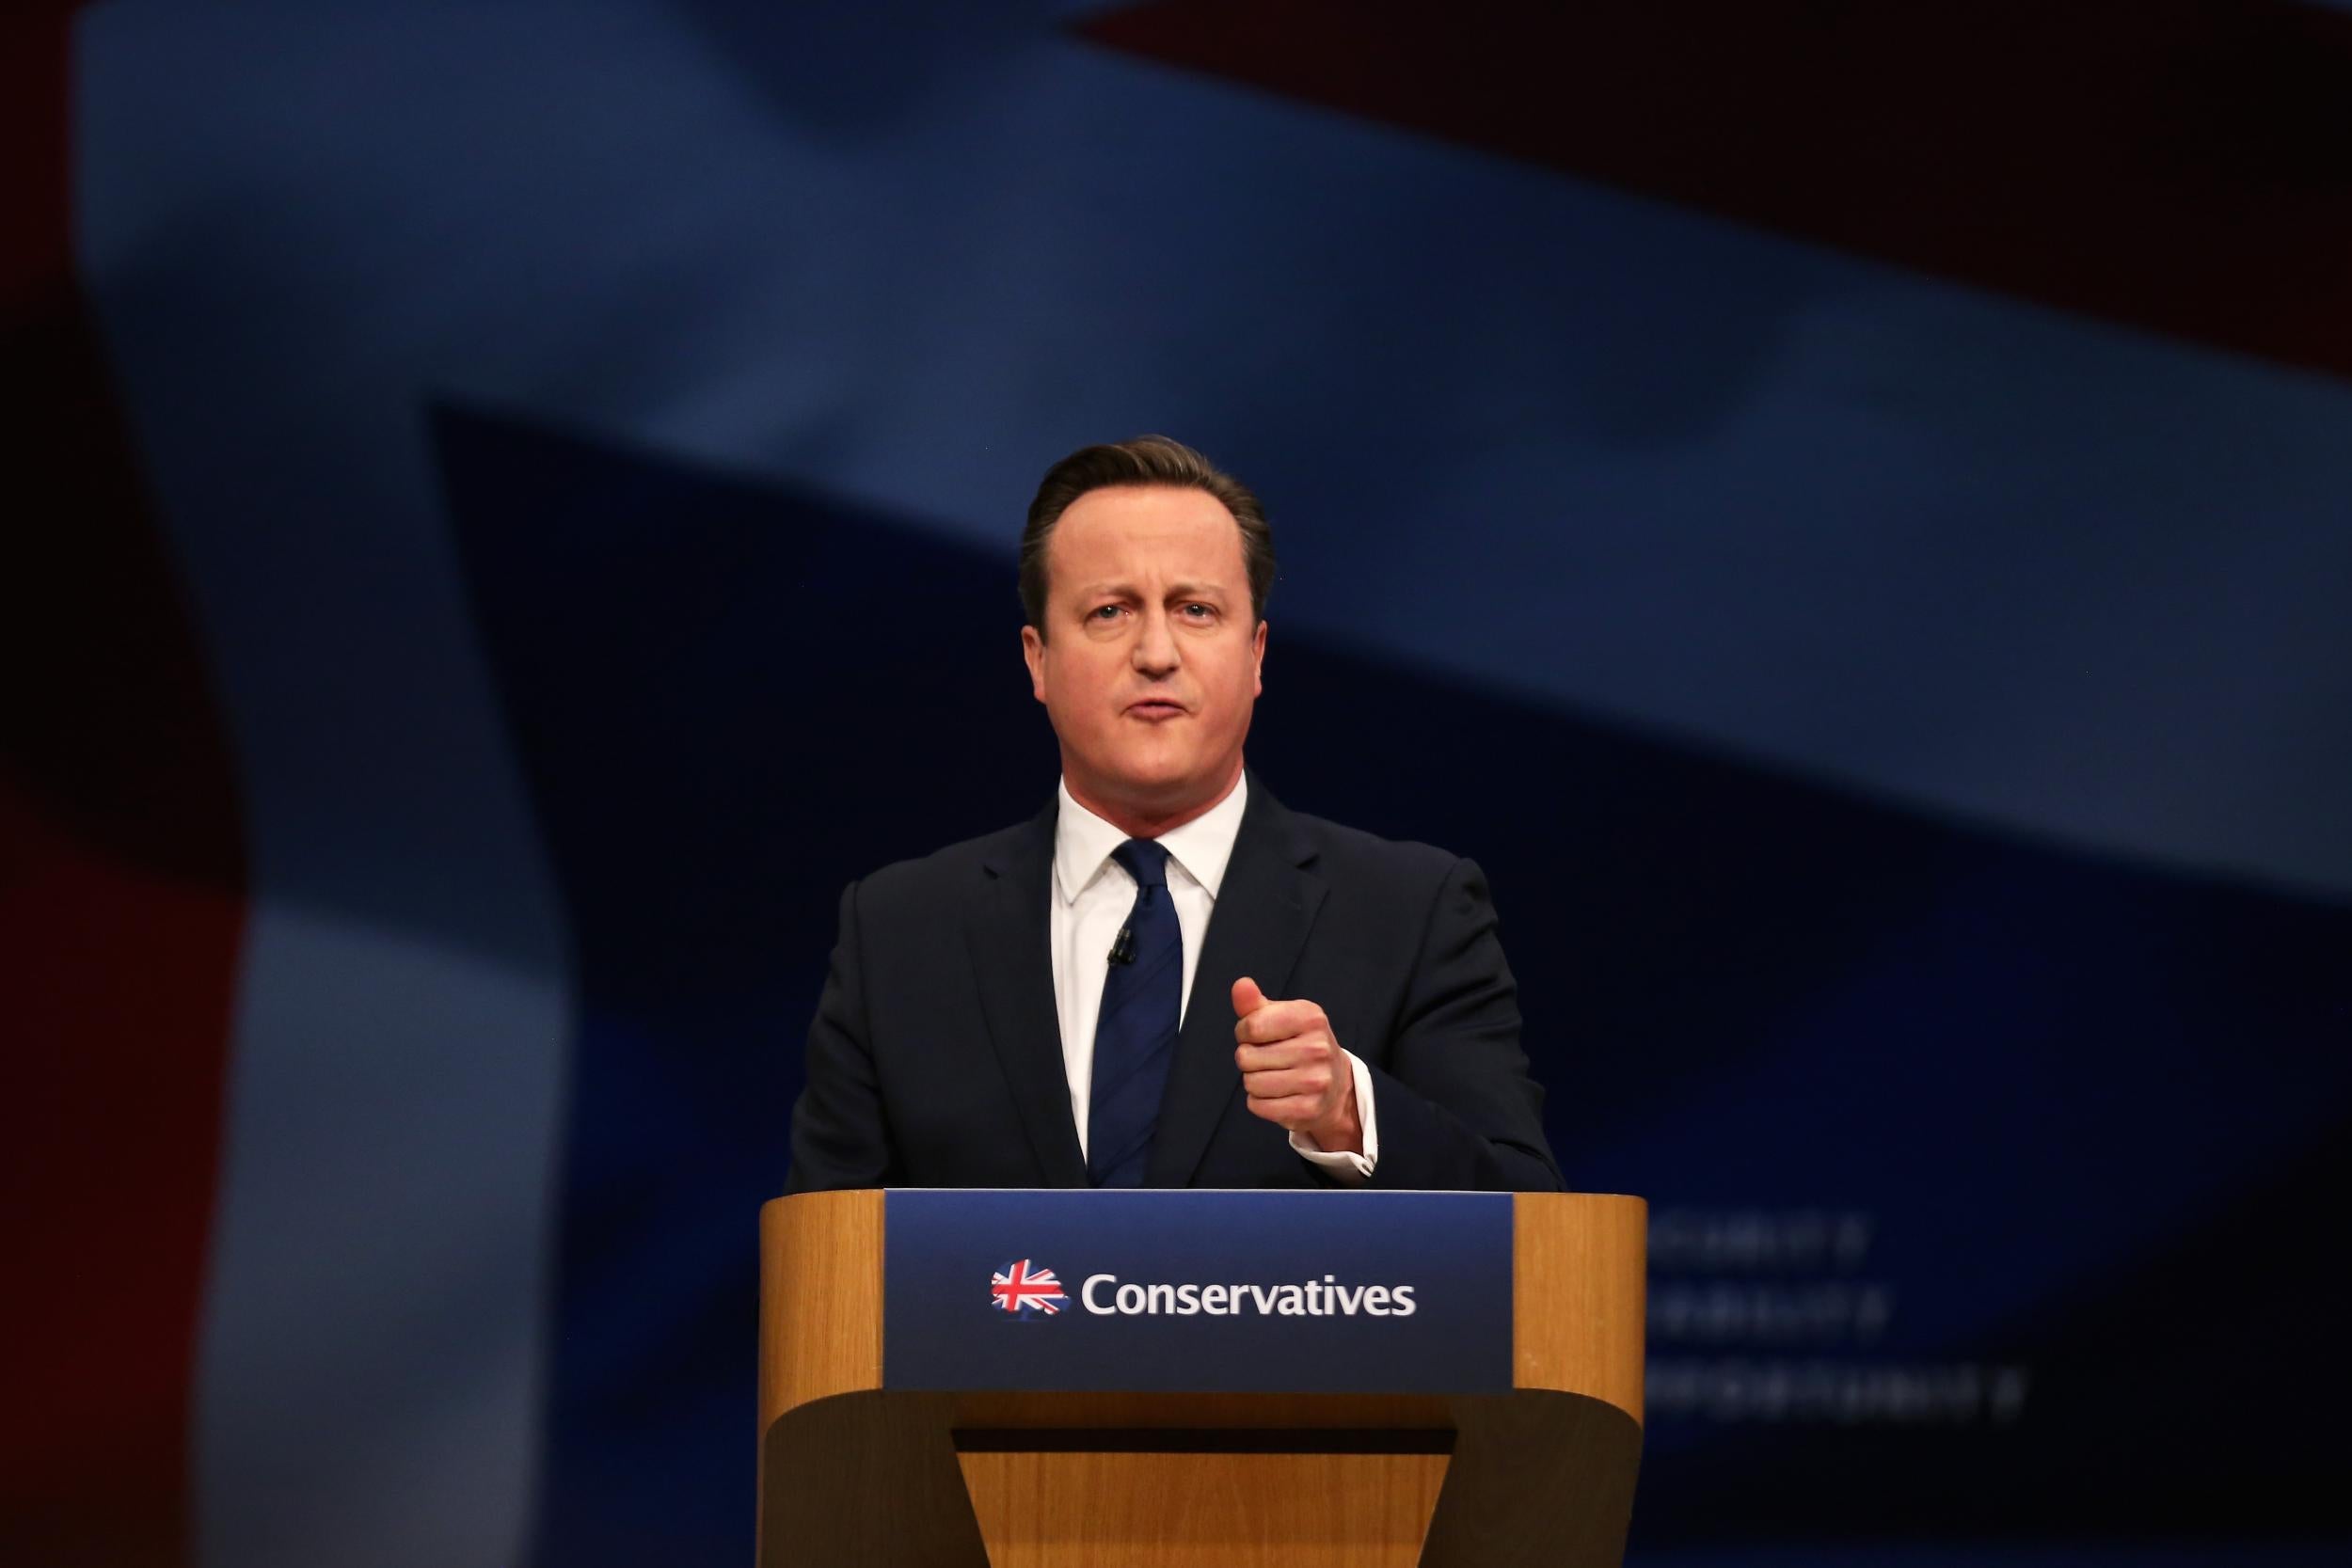 David Cameron speaks at the Tory party conference